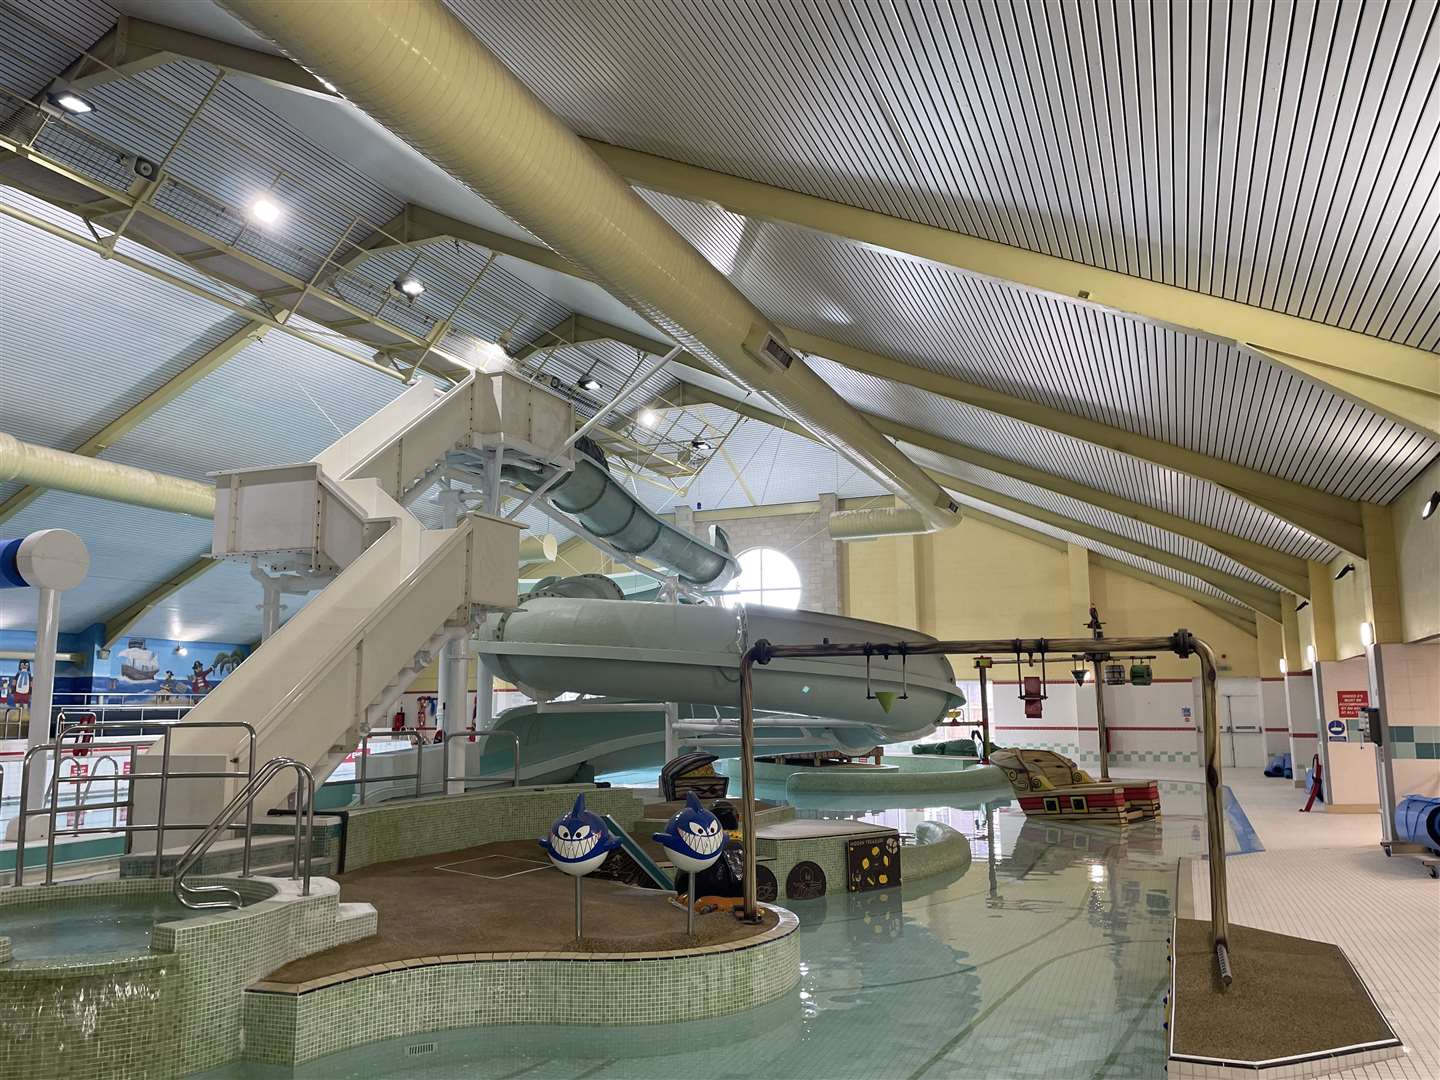 The inside of the refurbished Tenterden Leisure Centre pool which has only been open for three of the last 18 months